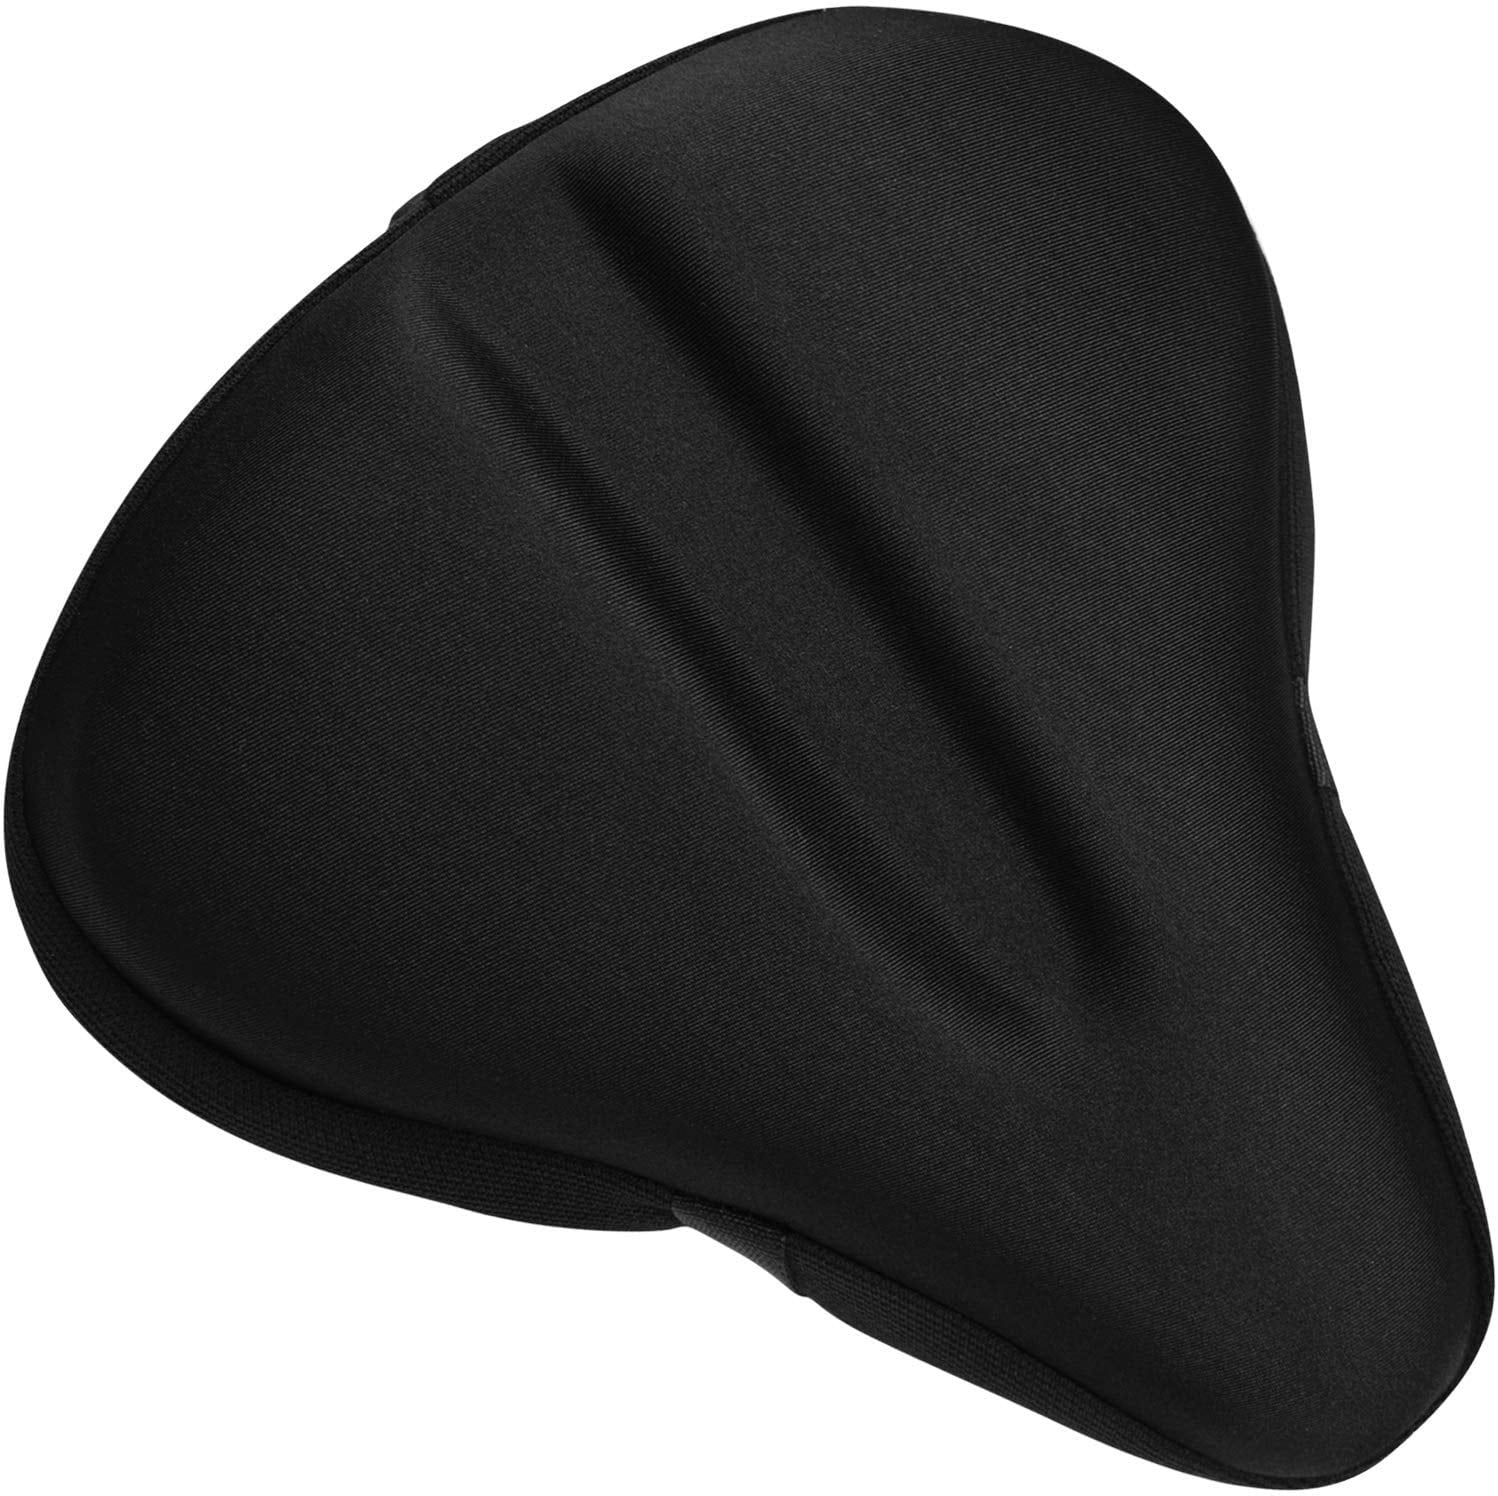 Suksadum Bike Seat Cushion Super Soft Comfort Bike Seat Cover for Men &  Women,Gel Padded Bicycle Seat Covers Compatible with